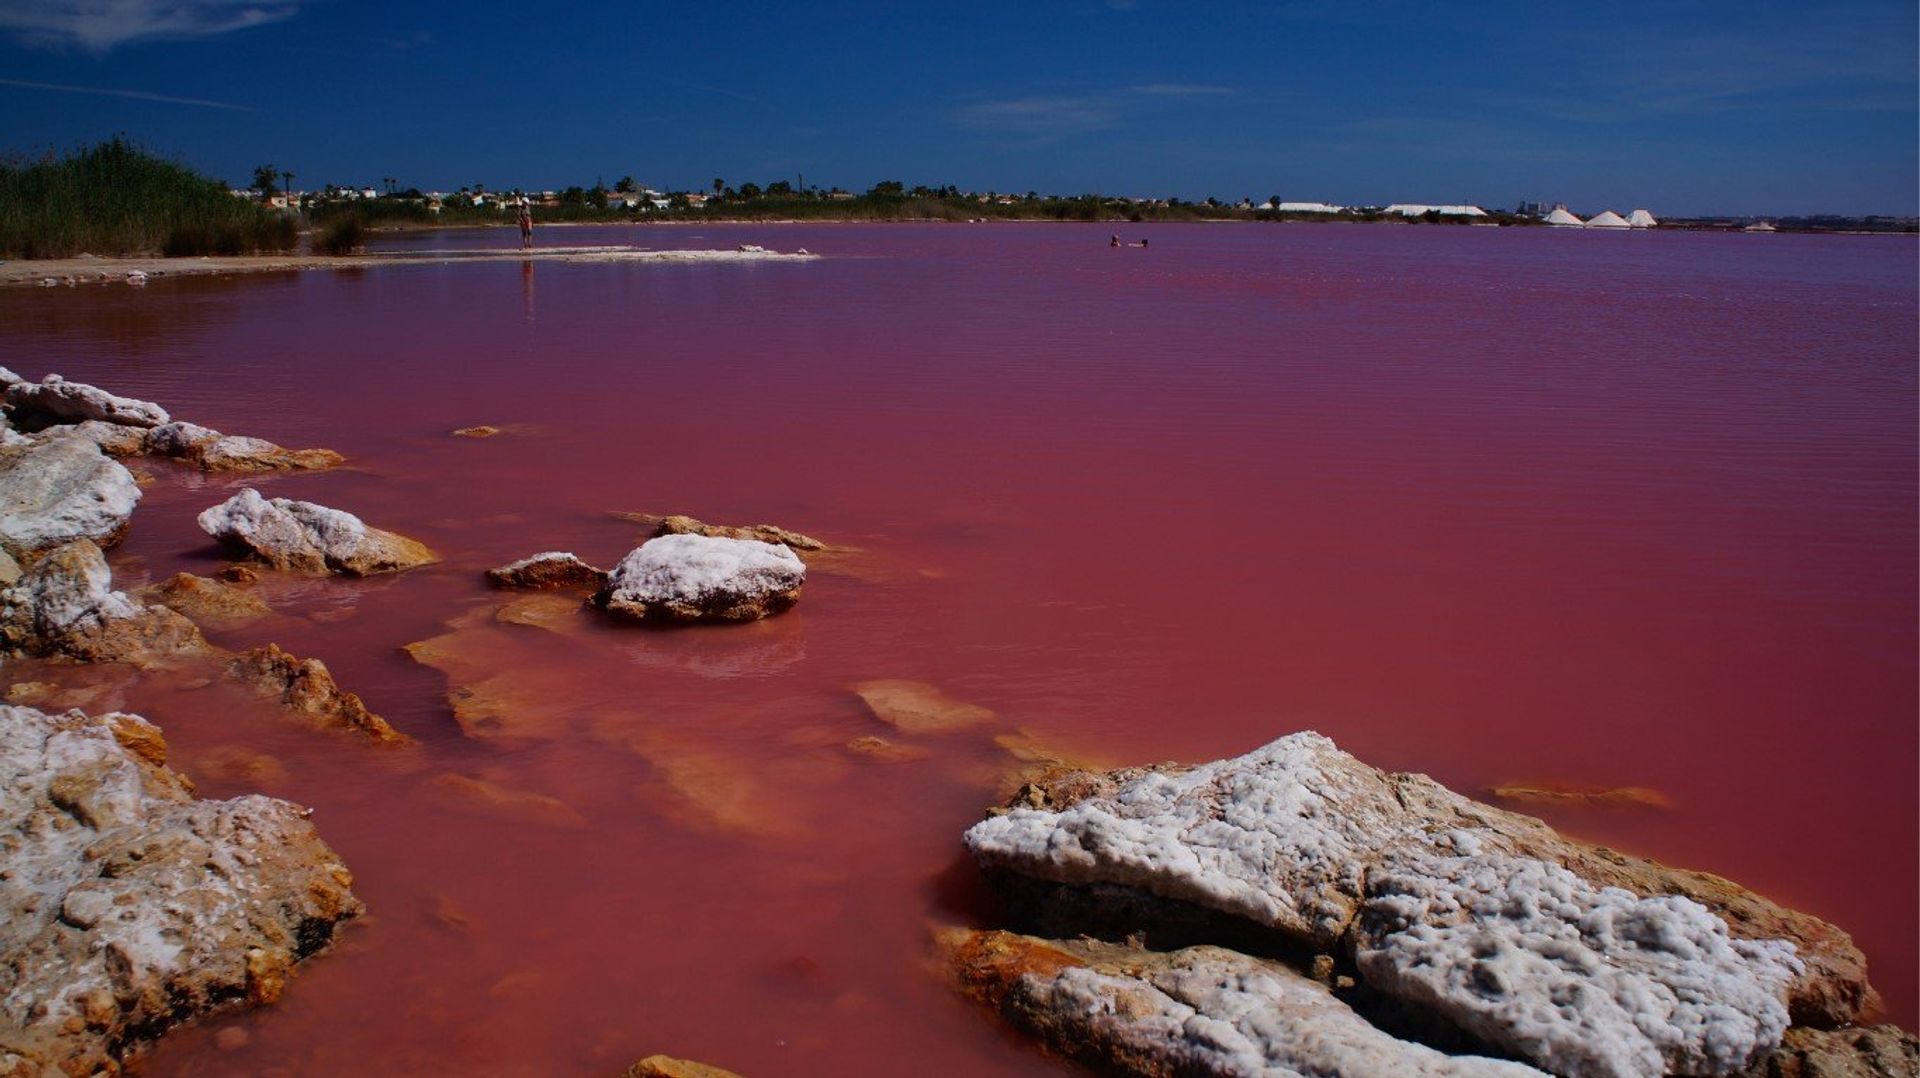 Torrevieja is famous for its two cleansing saltwater lakes; one pink and the other green